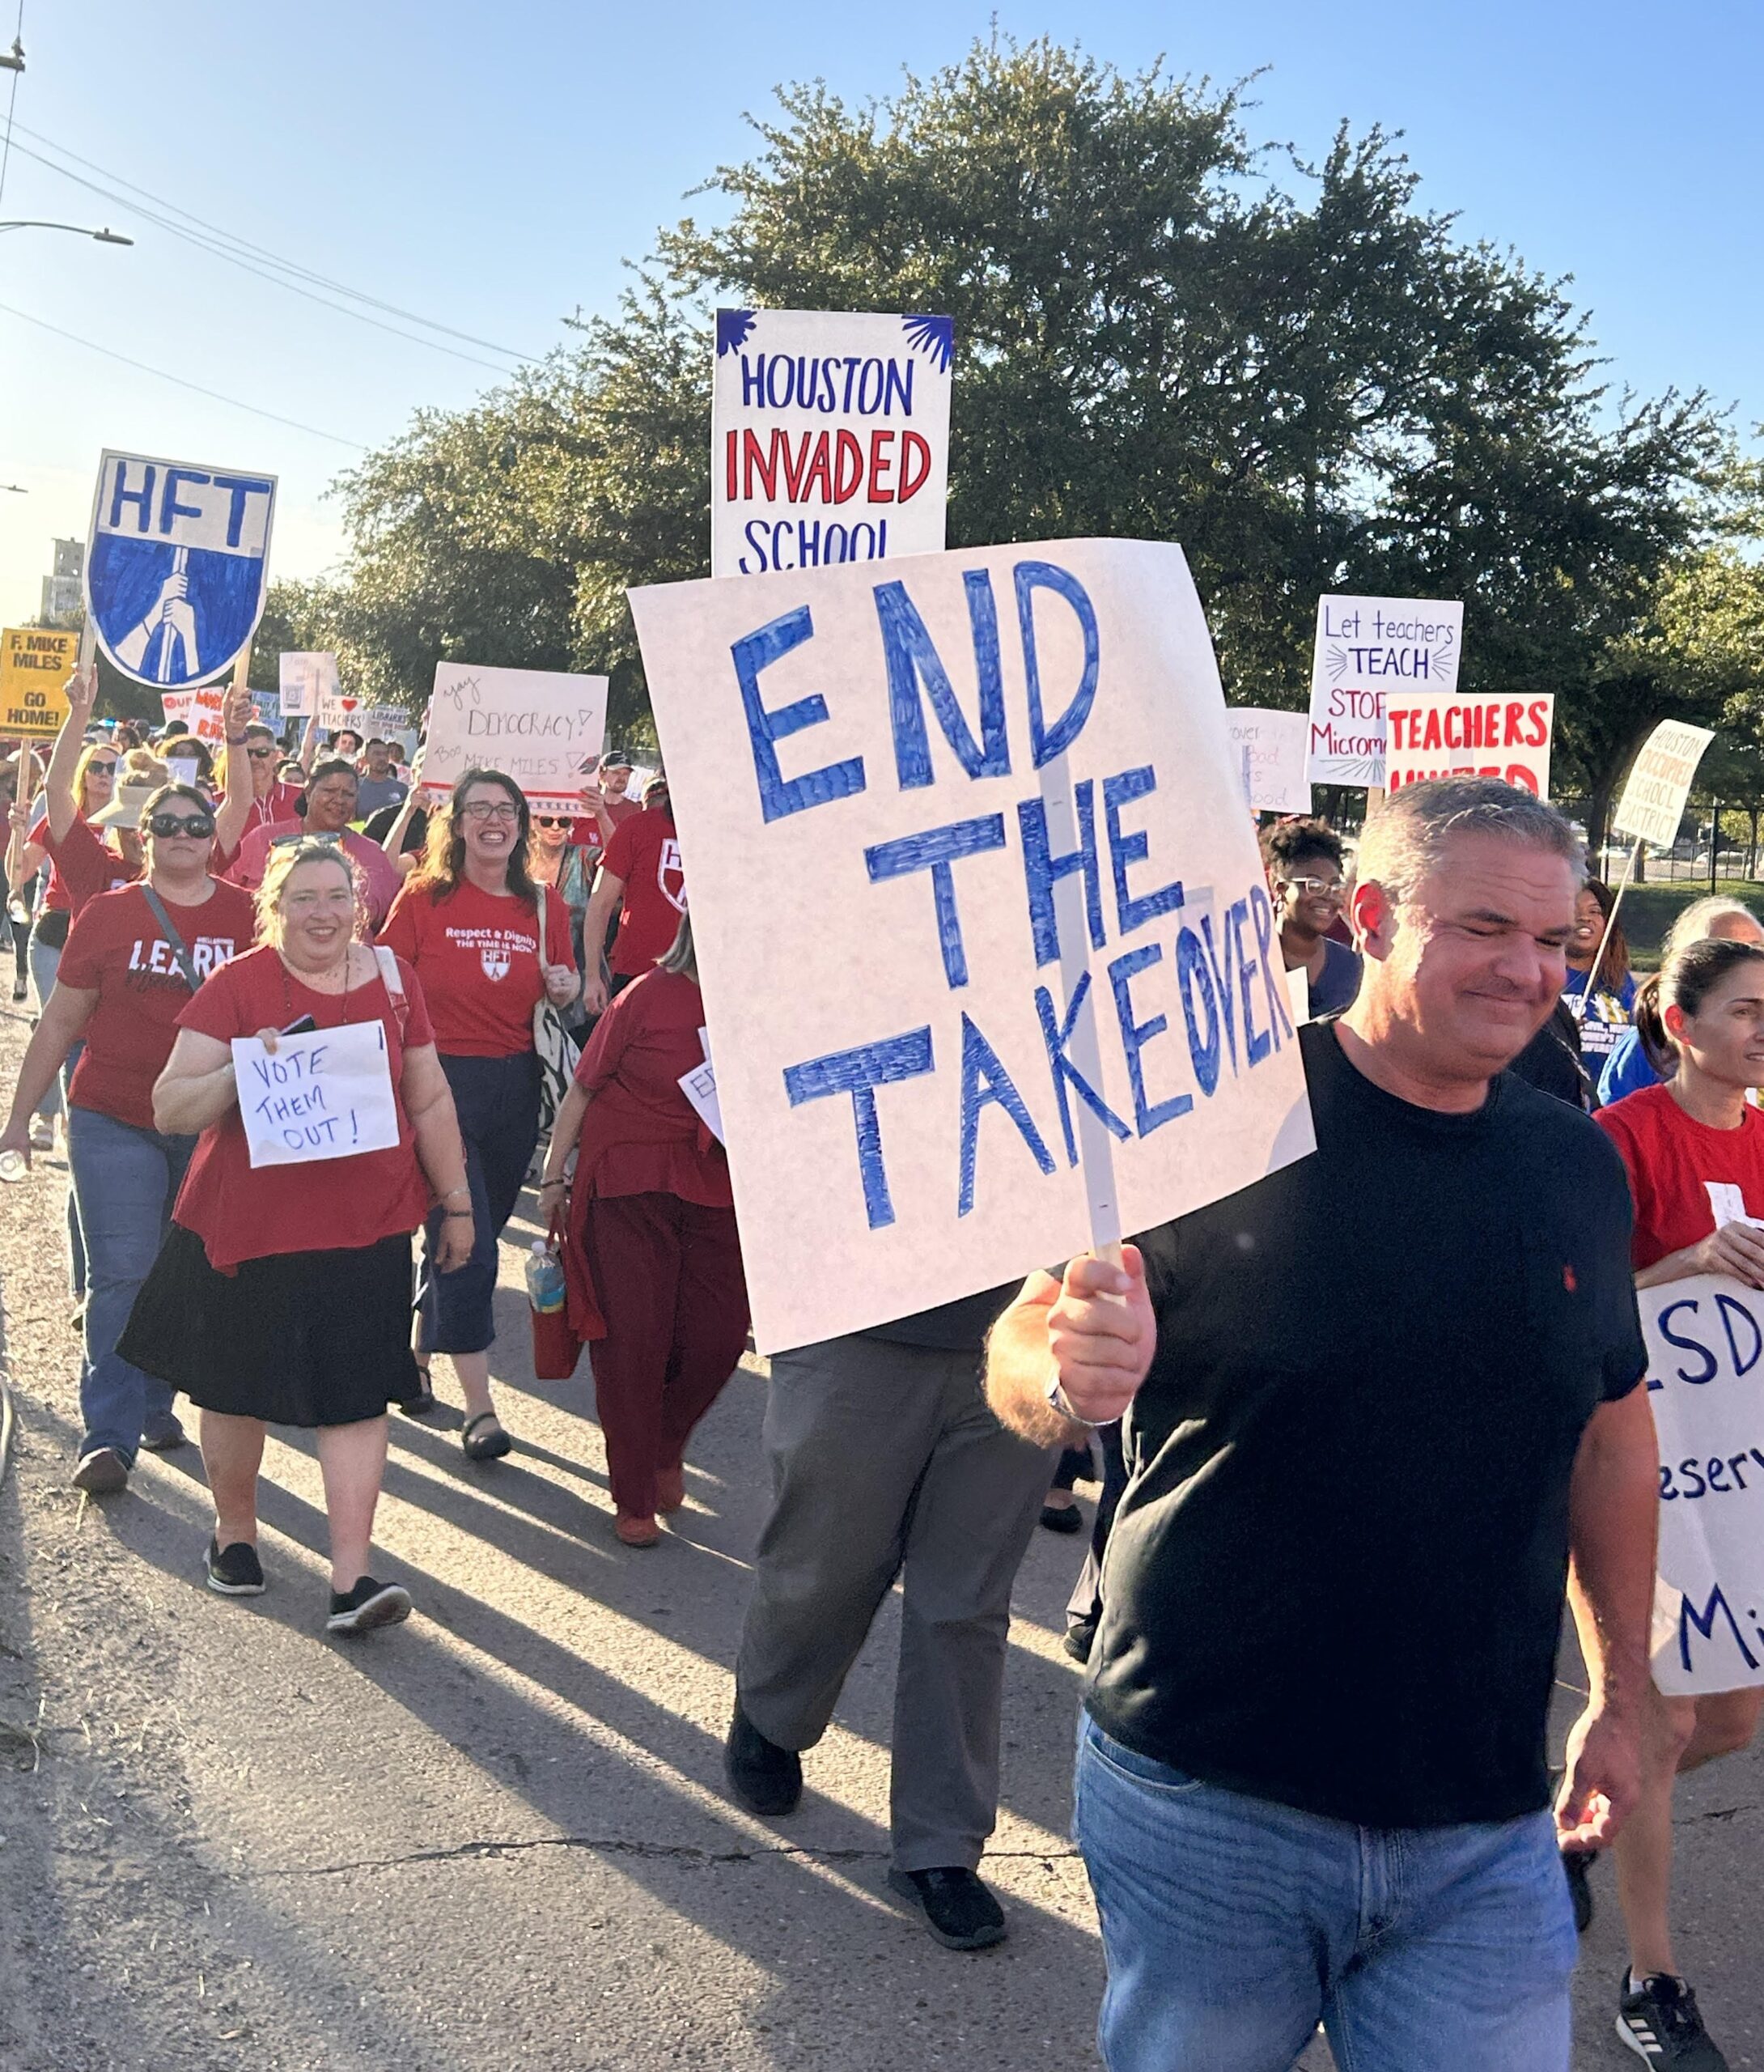 A dense crowd, most wearing red t-shirts, march with signs protesting the state take over of Houston ISD.